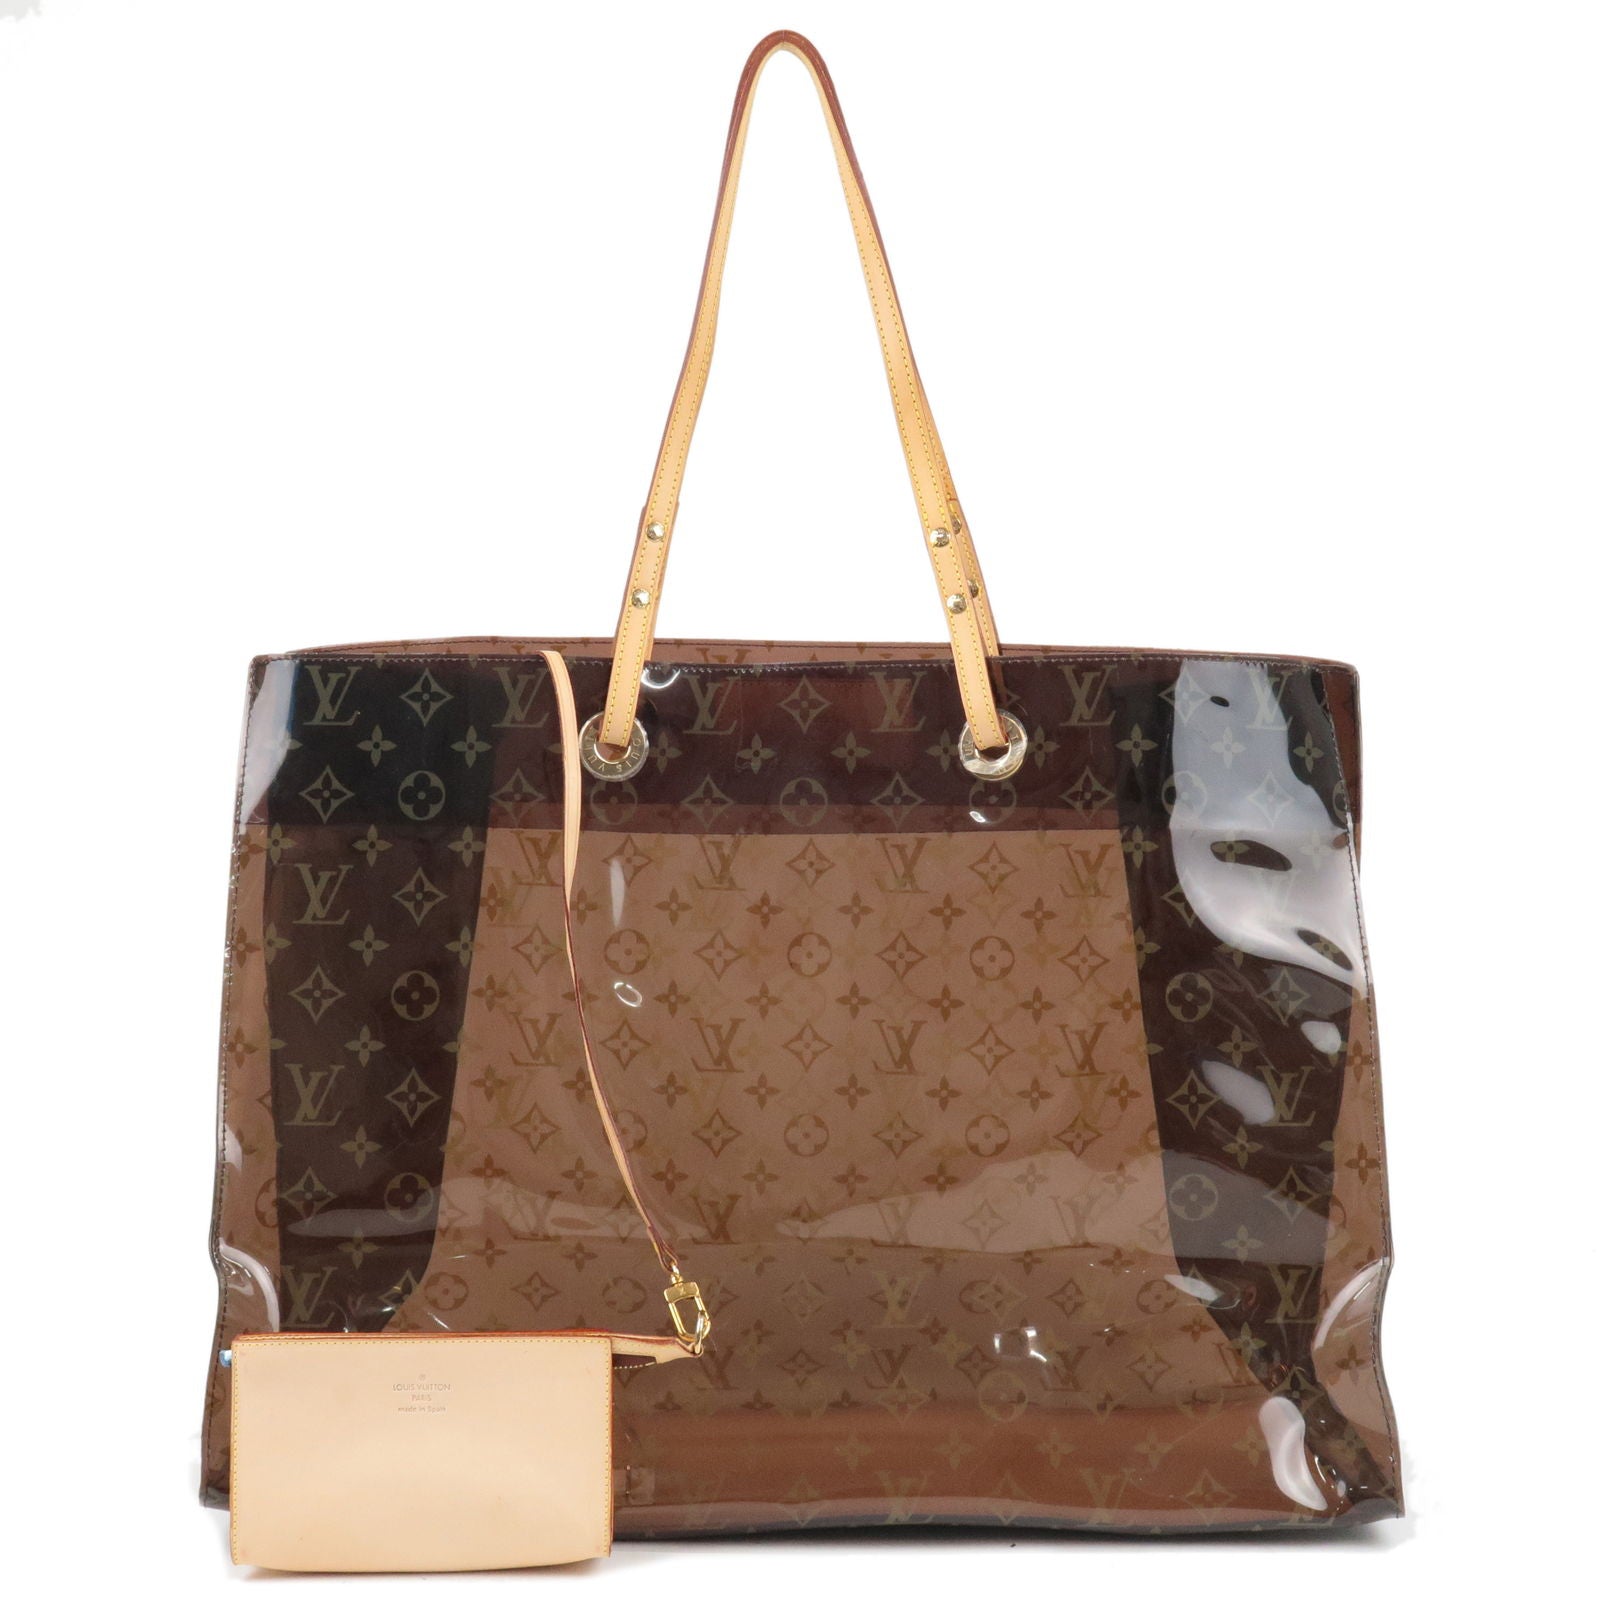 Vuitton - ep_vintage luxury Store - Tote - M50500 – dct - Cruise